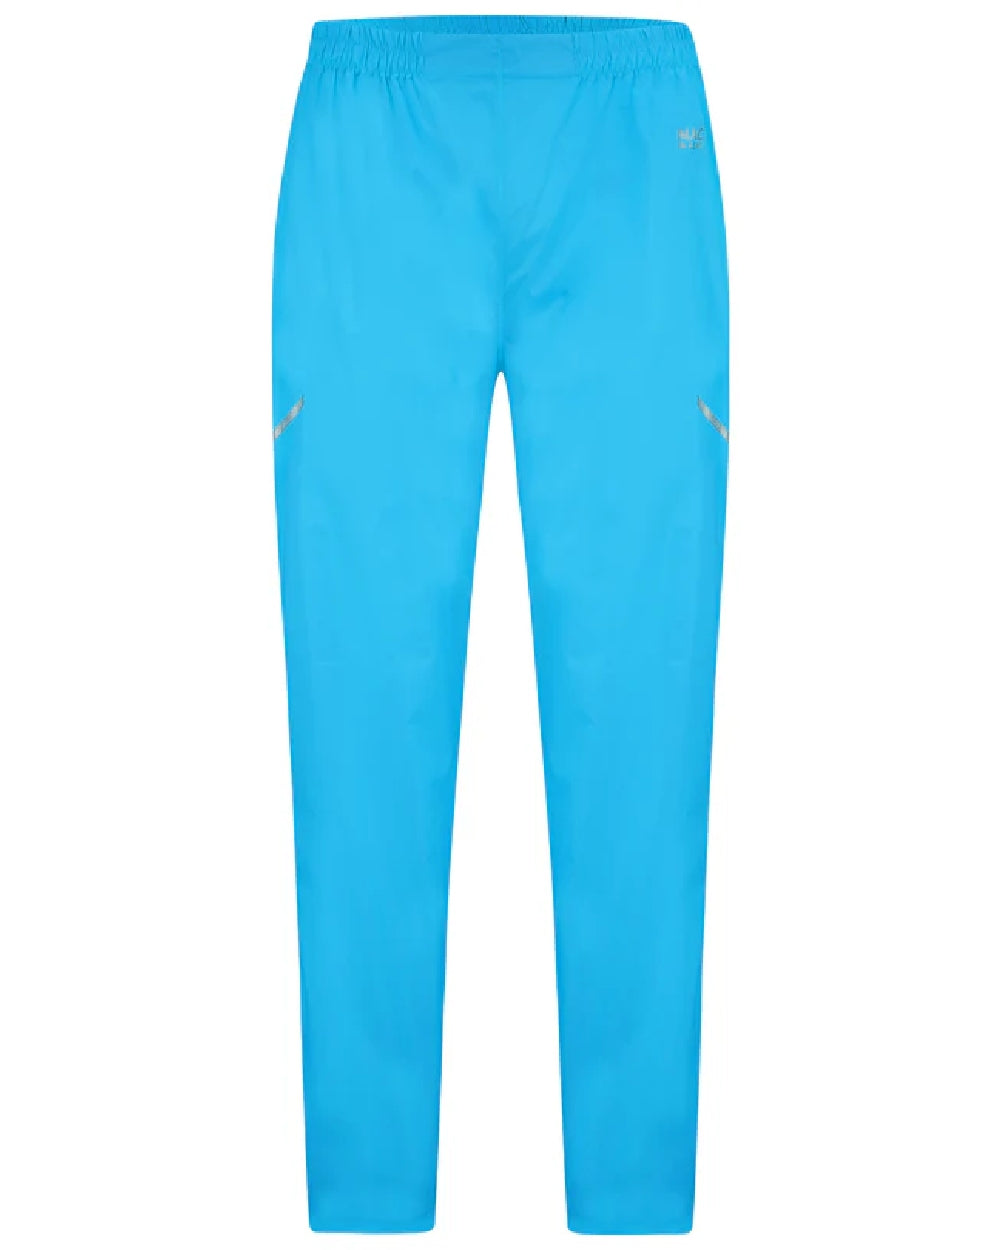 Neon Blue coloured Mac In A Sac Origin Packable Full Zip Overtrousers on white background 